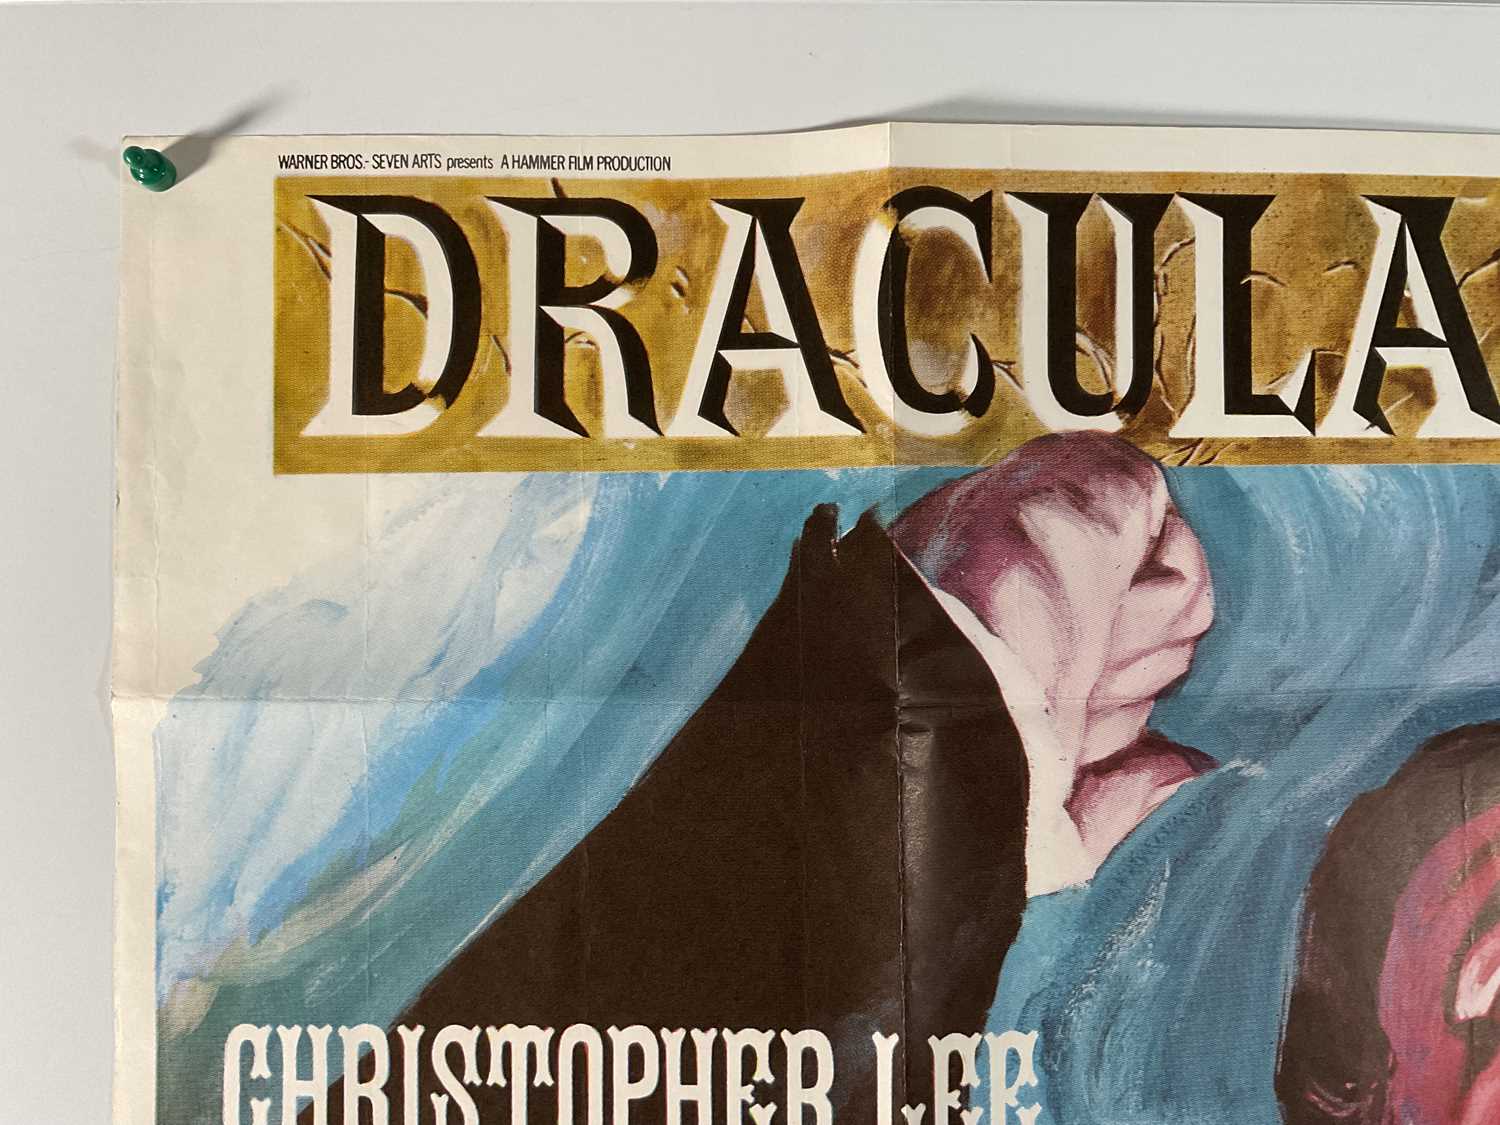 DRACULA HAS RISEN FROM THE GRAVE (1969) - UK Quad film poster, Tom Chantrell artwork of - Image 2 of 7